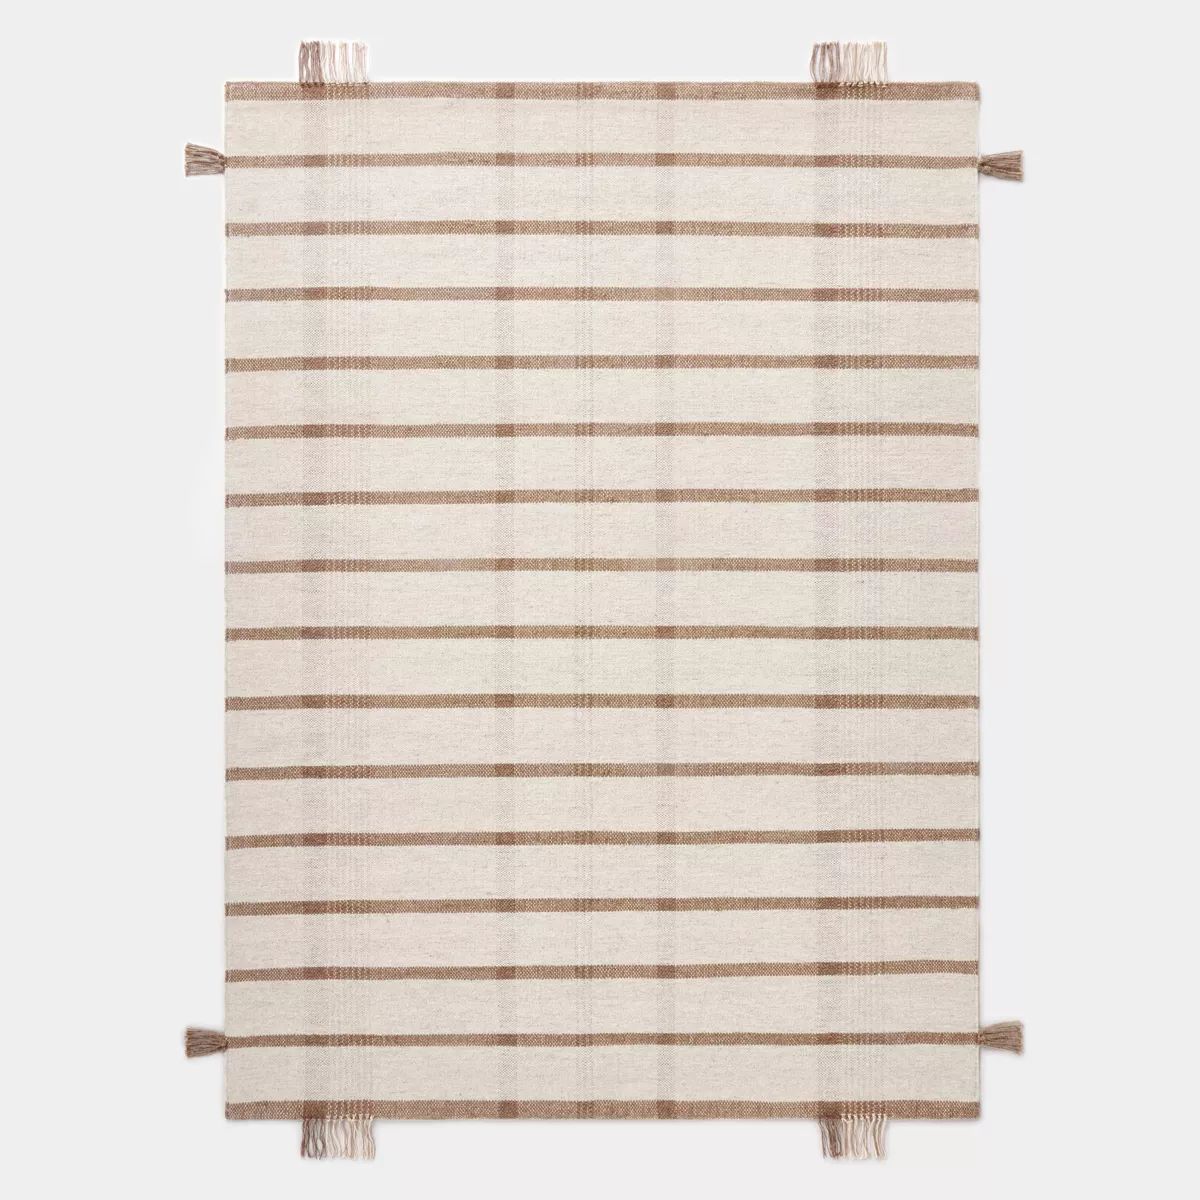 Handwoven Plaid Flat Weave Area Rug Cream/Brown - Threshold™ designed with Studio McGee | Target